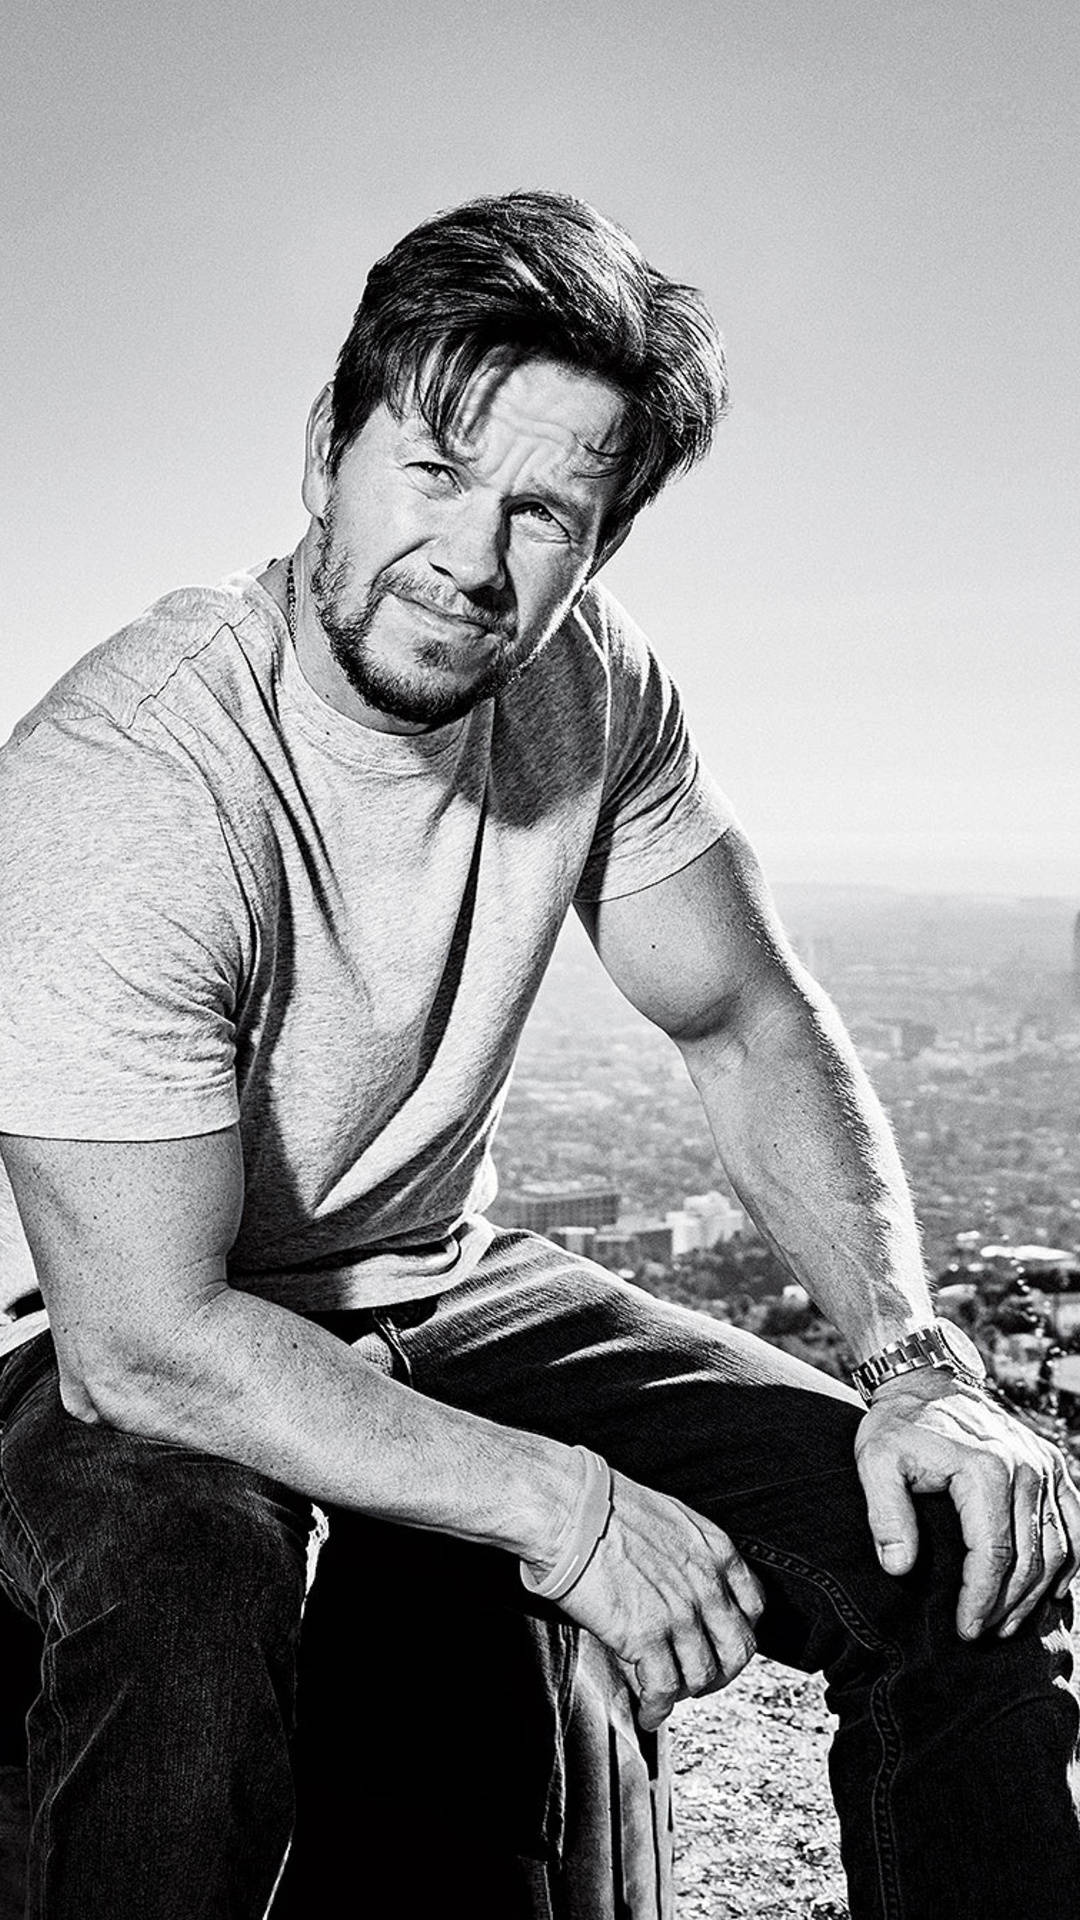 HAPPY BIRTHDAY       TO MARK WAHLBERG. 

FROM  